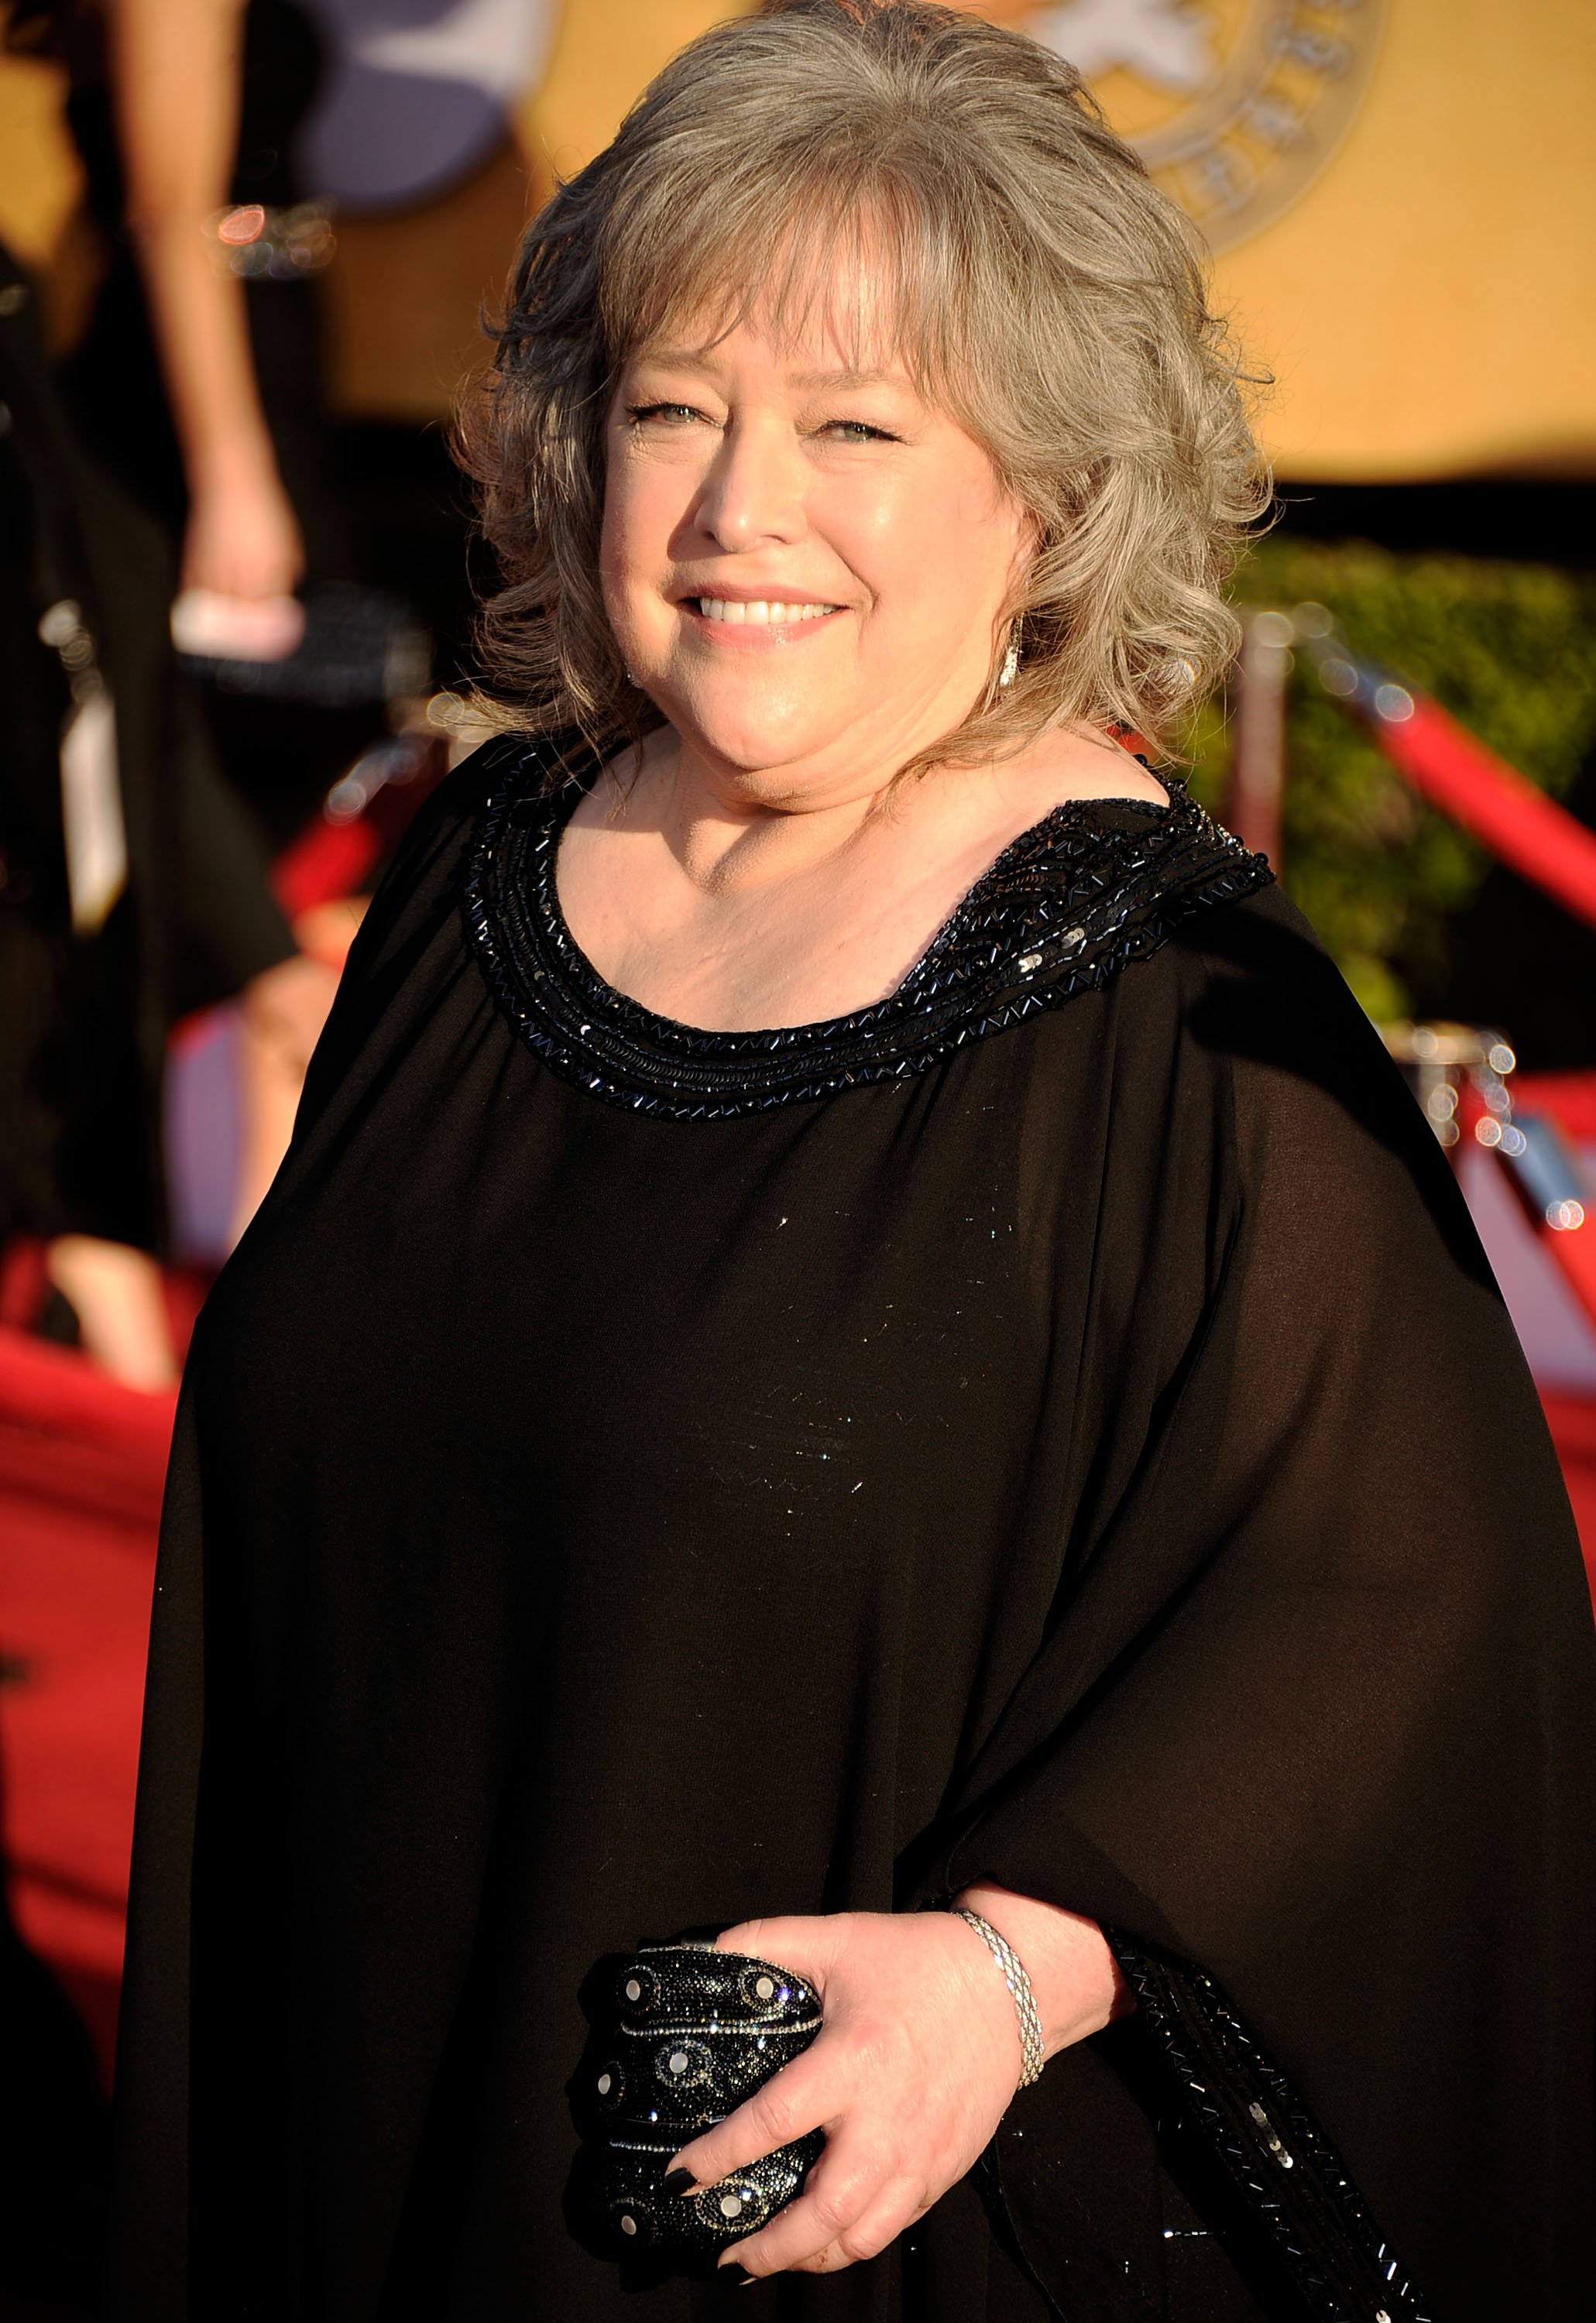 Kathy Bates at the 18th Annual Screen Actors Guild Awards on January 29, 2012, in Los Angeles, California. | Source: Frazer Harrison/Getty Images